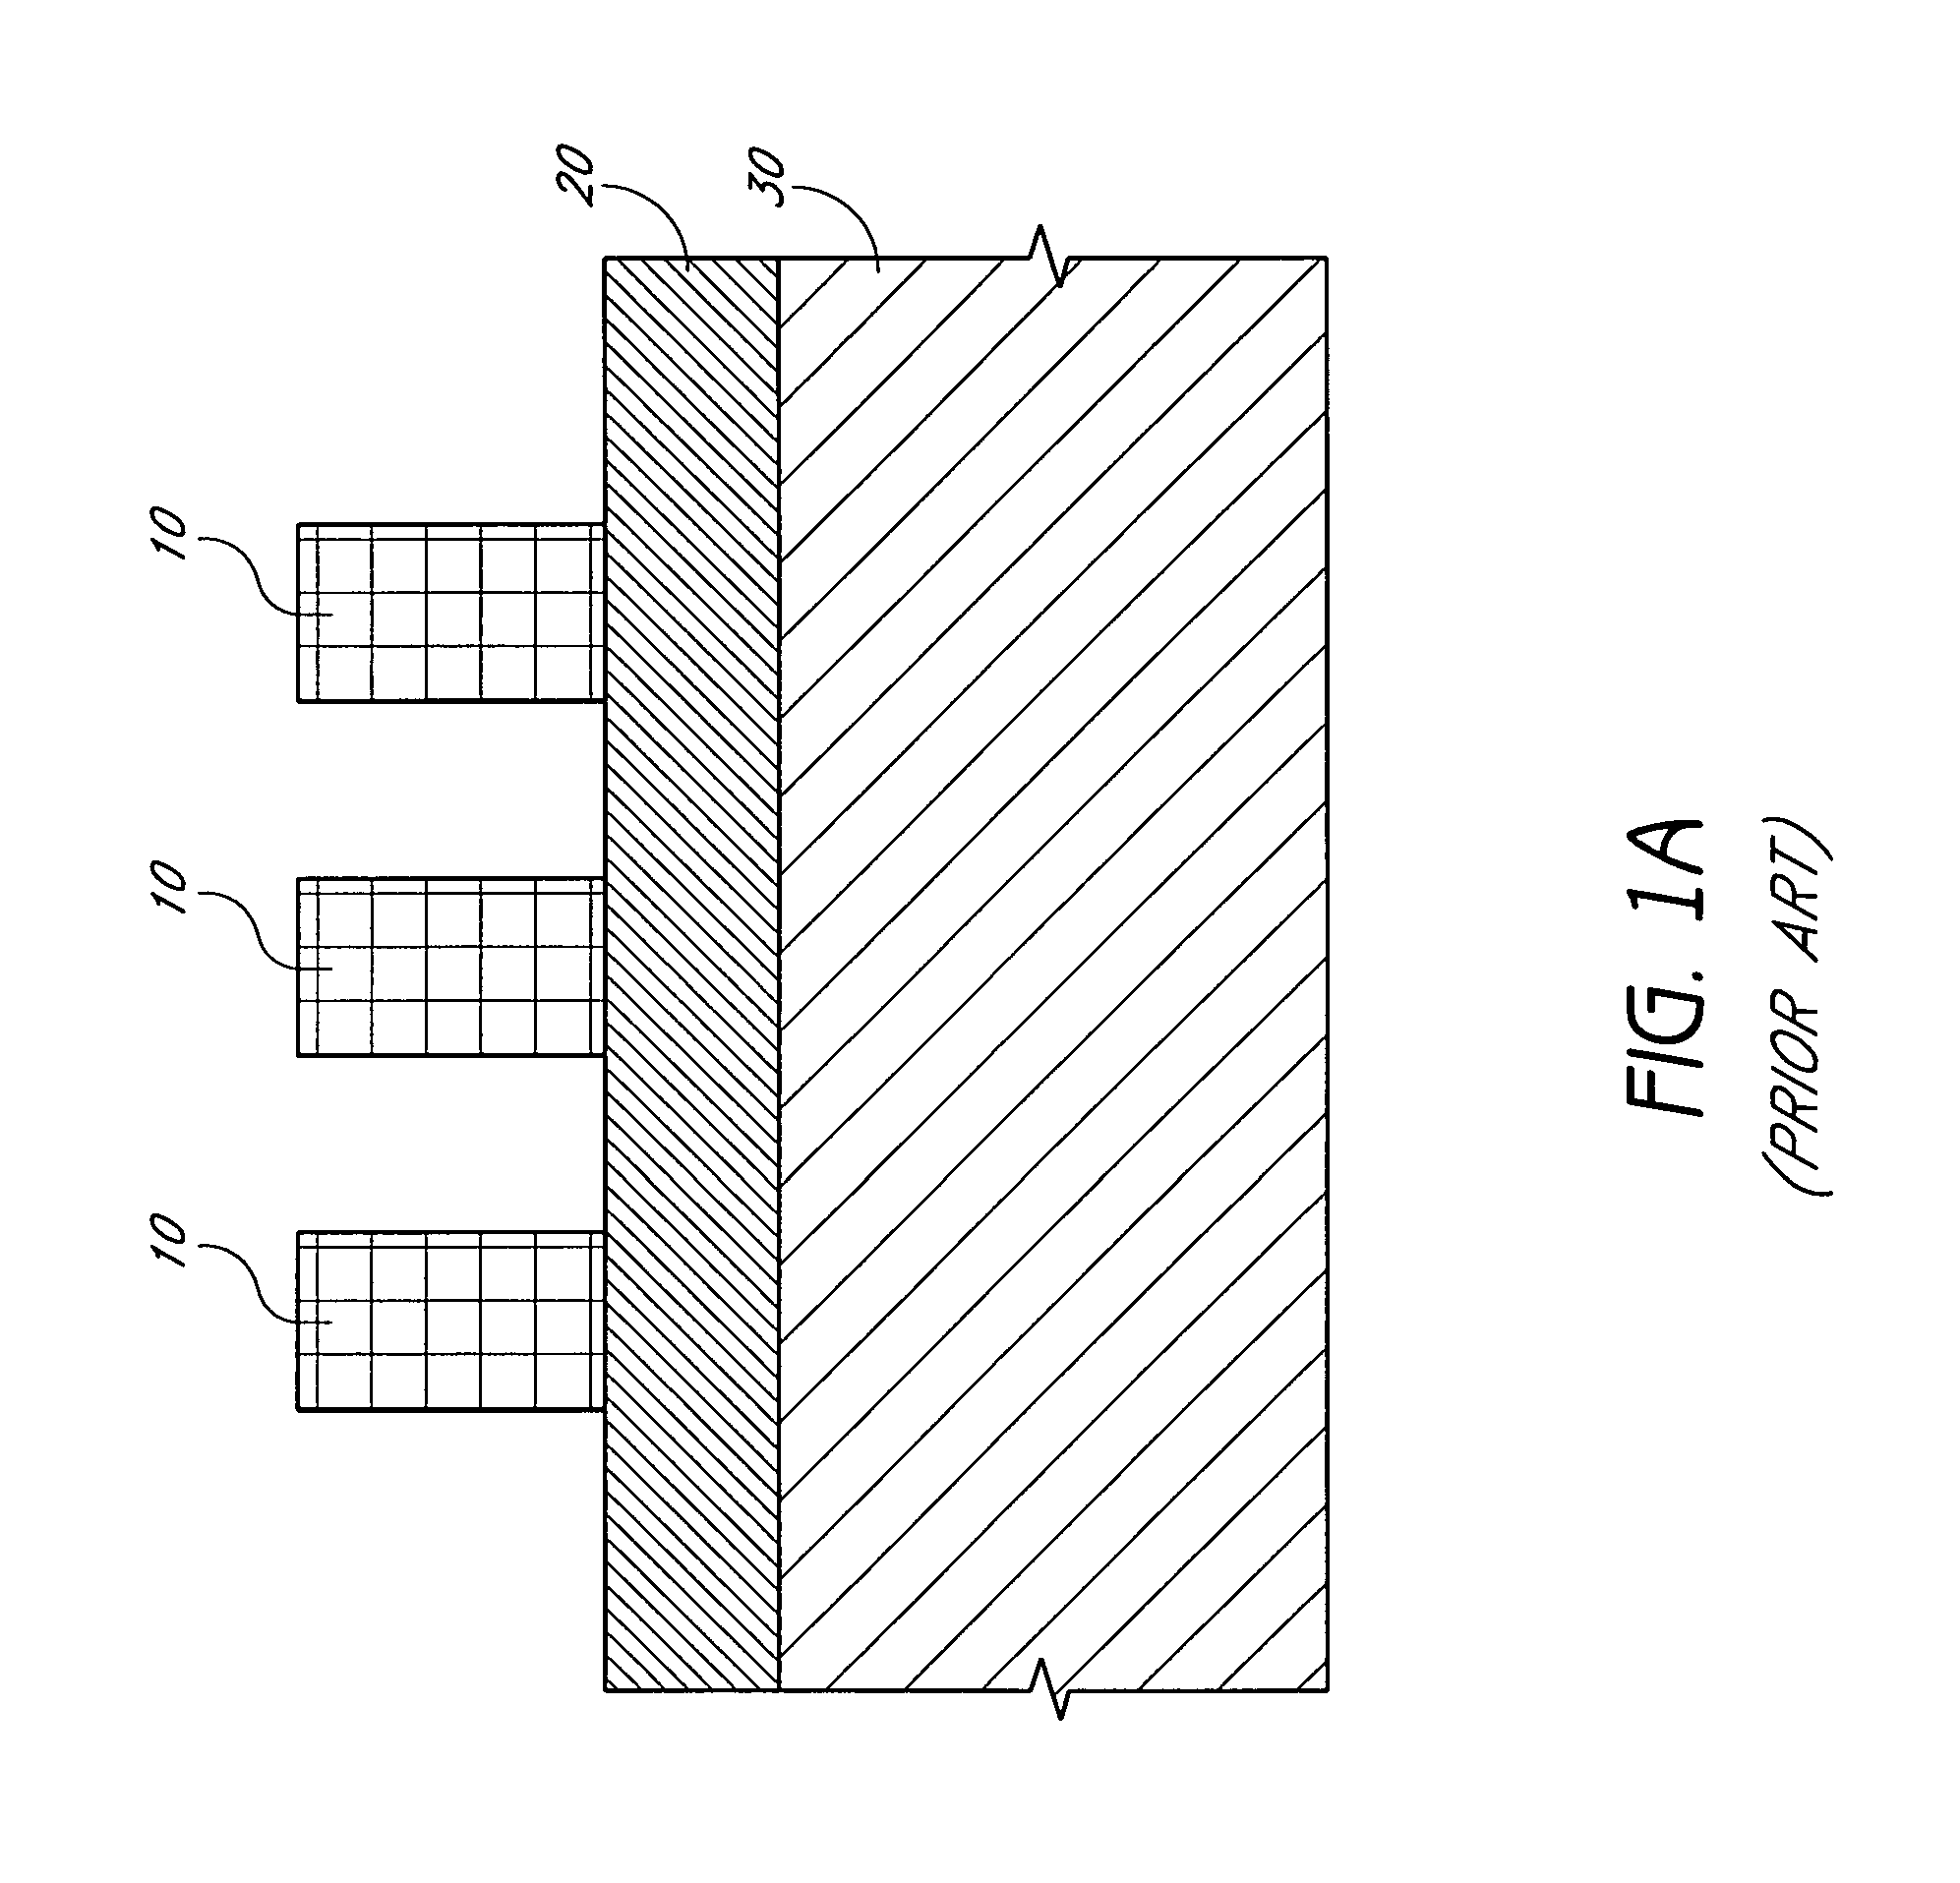 Pitch multiplication spacers and methods of forming the same